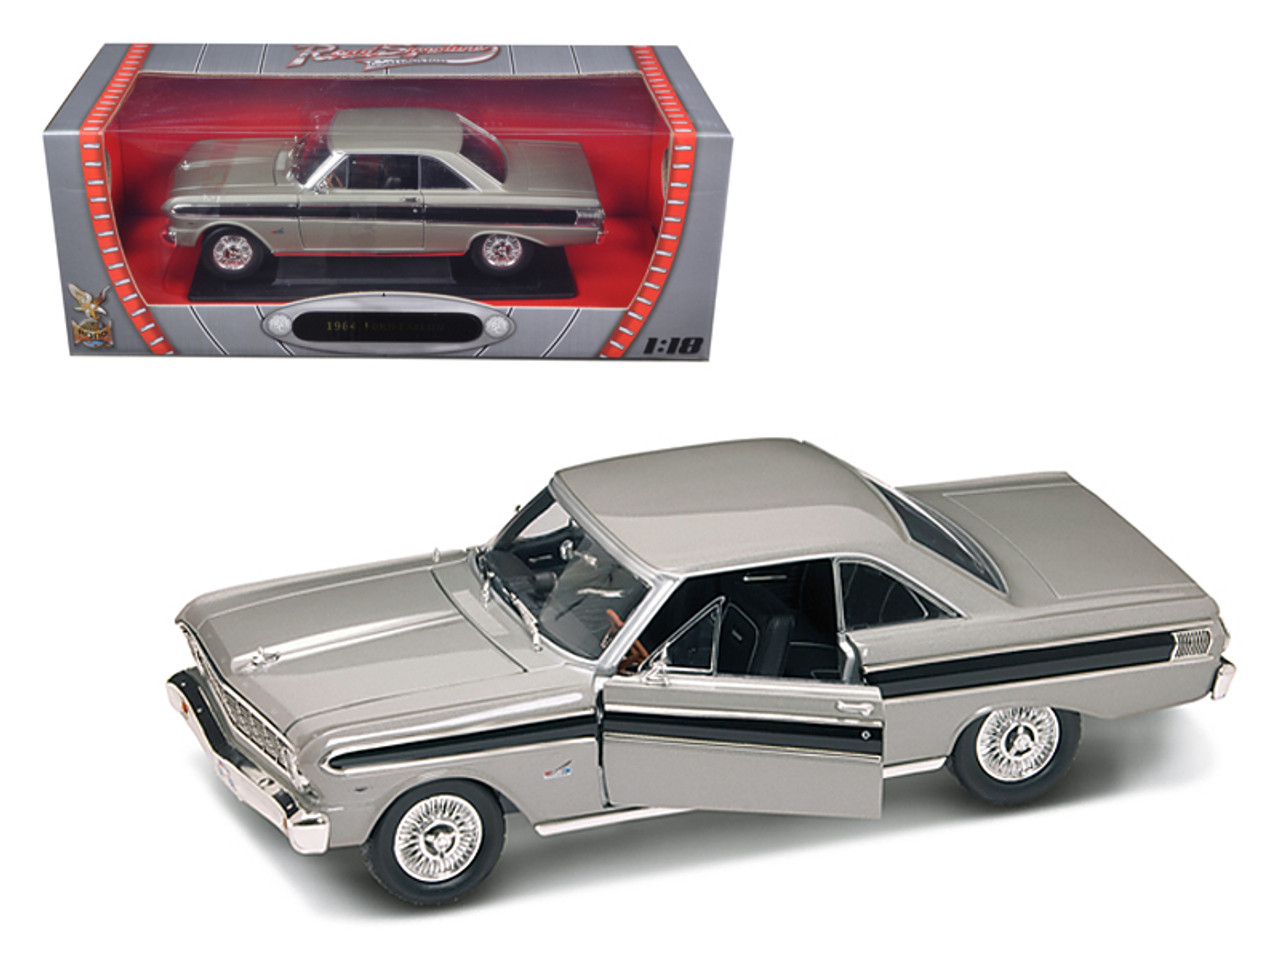 1964 Ford Falcon Gray 1/18 Diecast Model Car by Road Signature